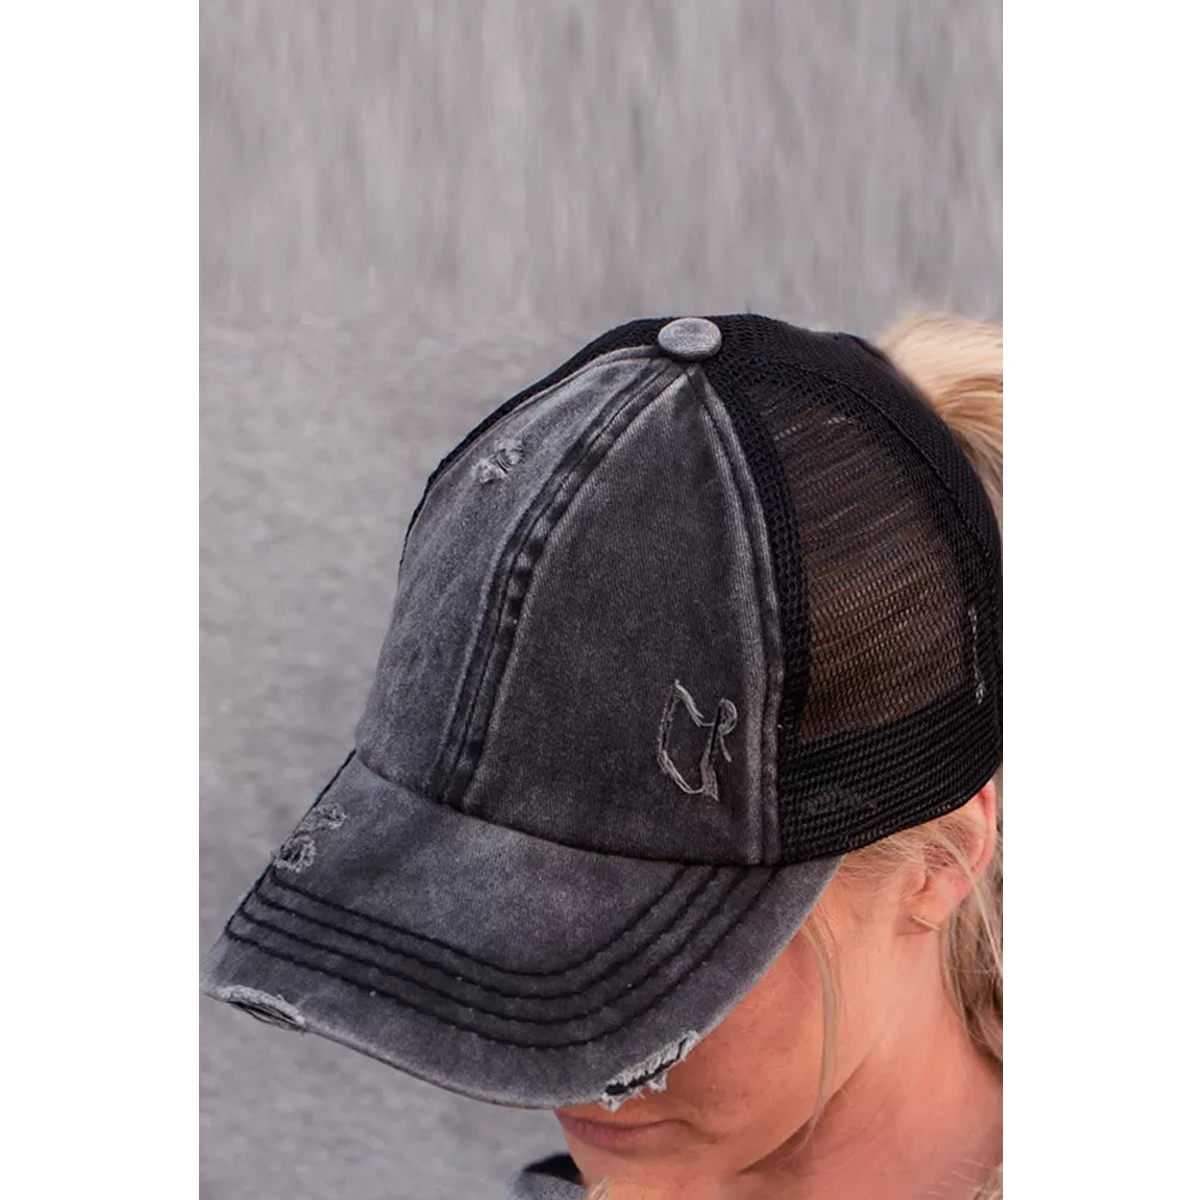 Black Distressed Hat - Southern Grace Creations